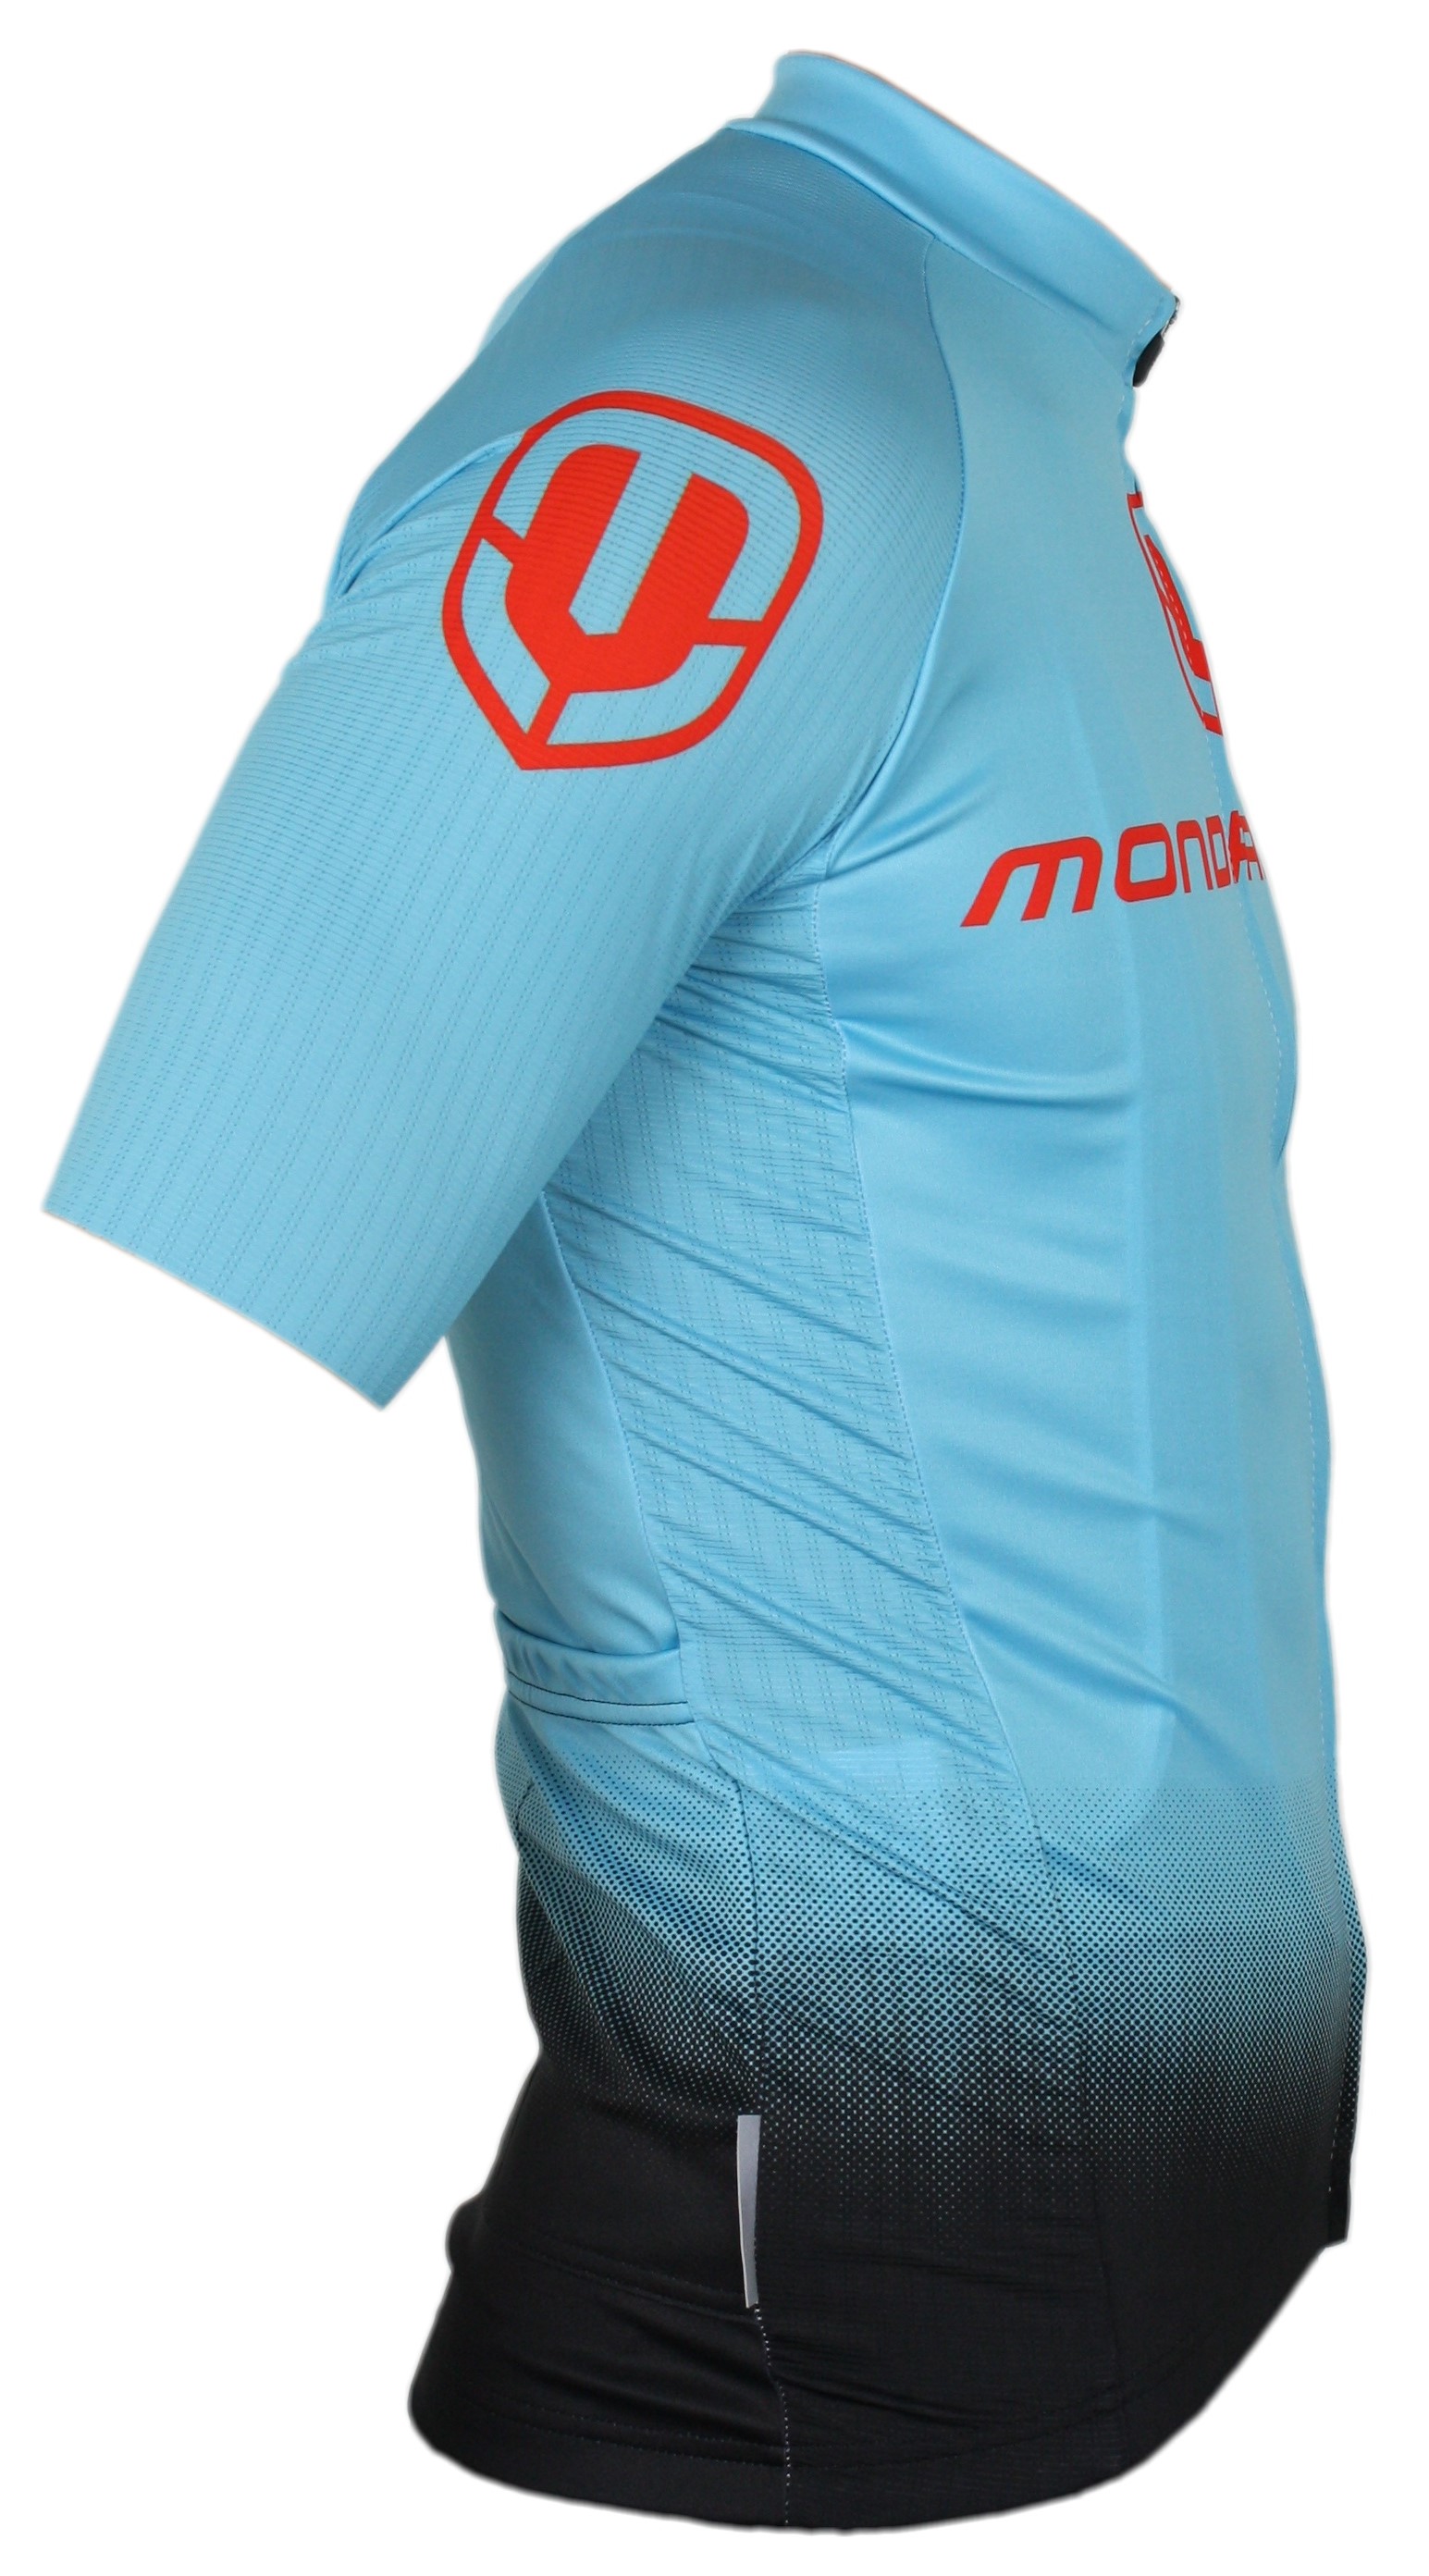 XC Jersey, blue/red